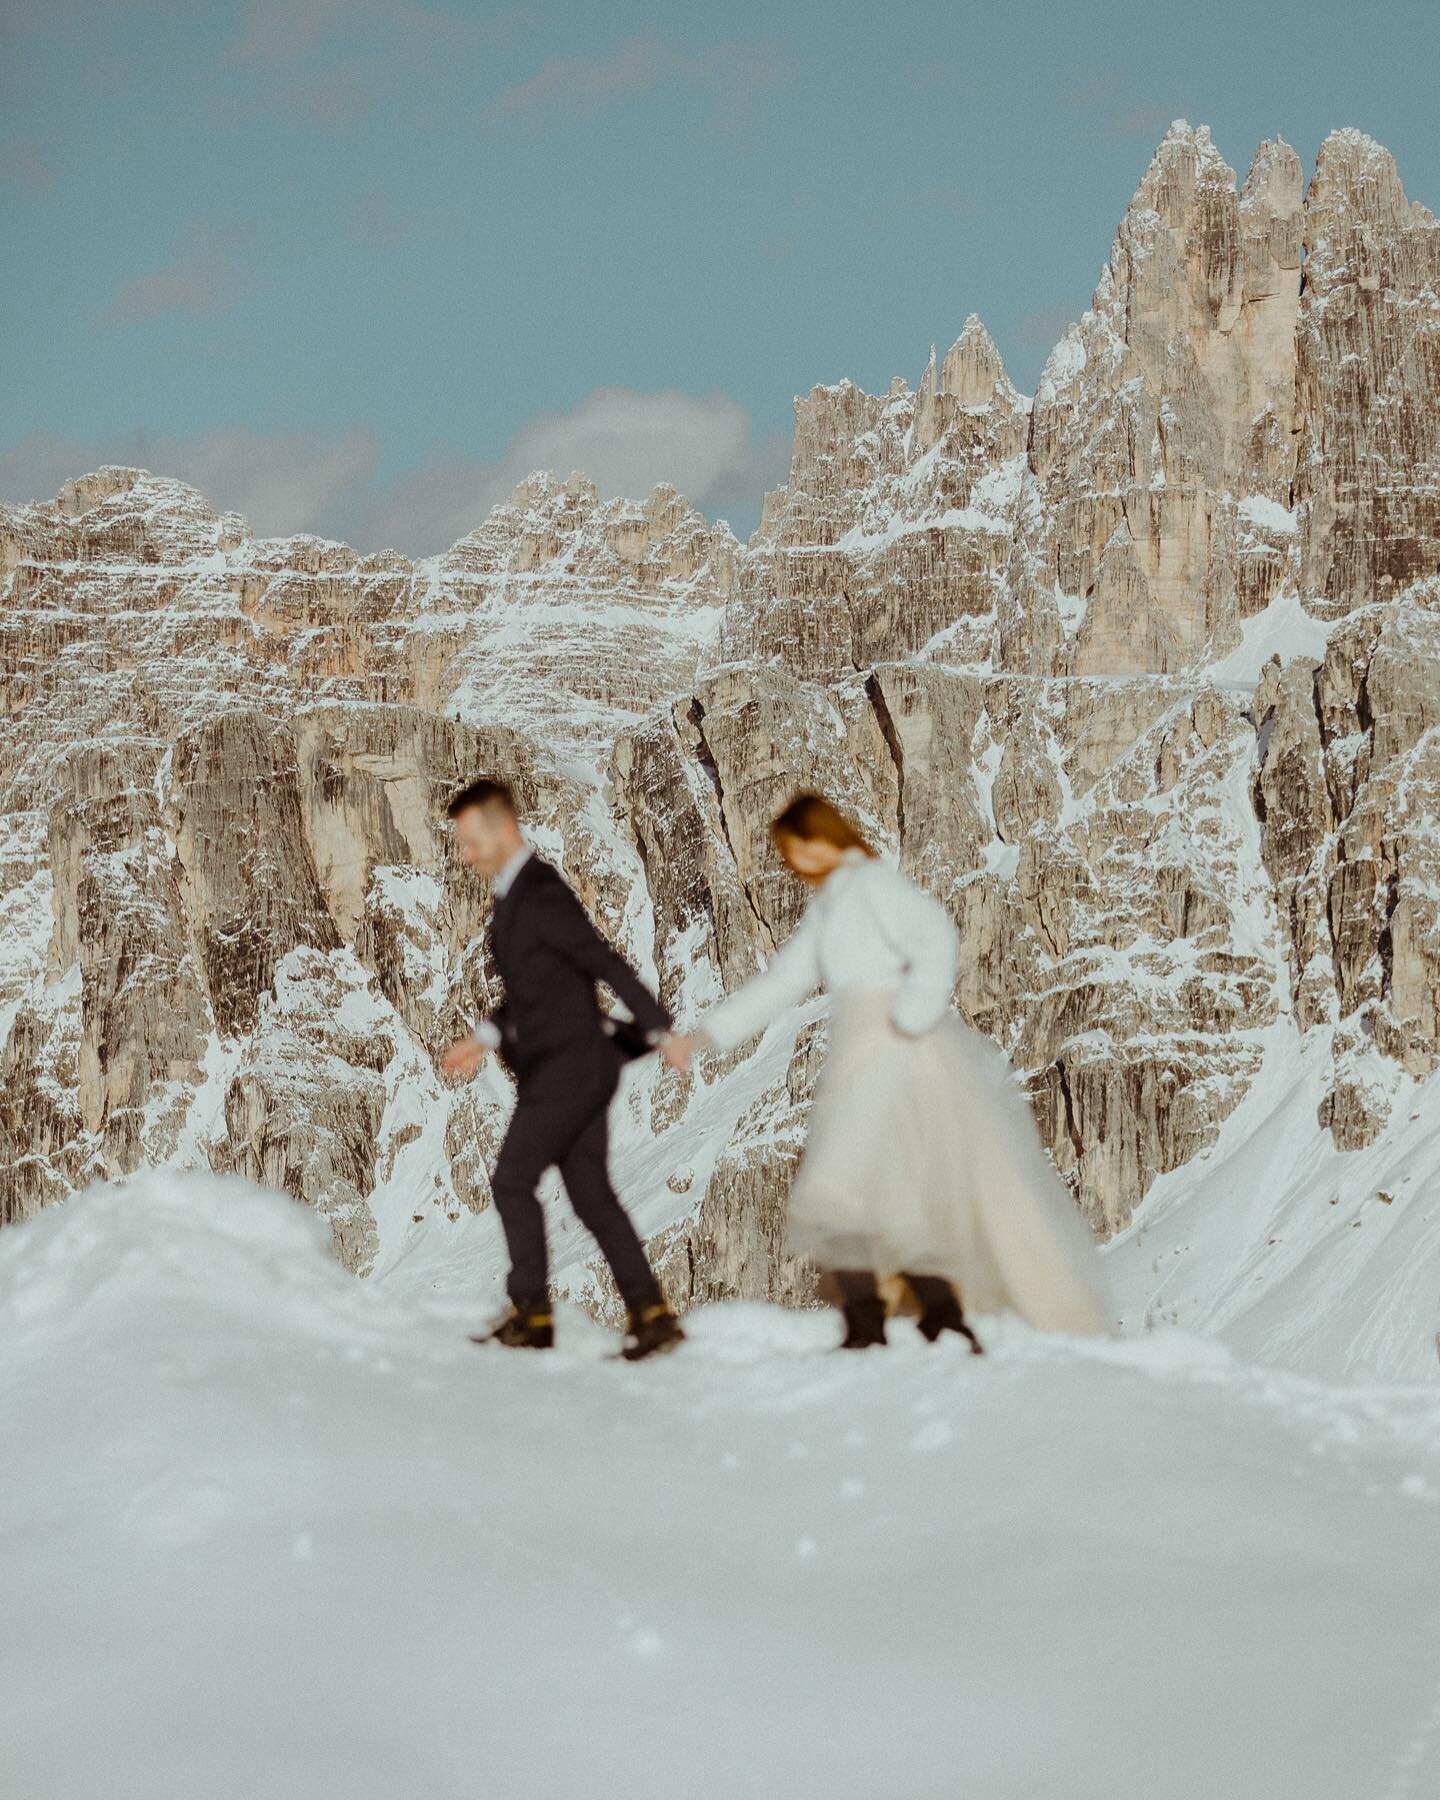 THE DOLOMITES // in winter aren&rsquo;t just for skiers. They&rsquo;re for all the romantic souls seeking a different kind of off-piste adventure. 

Planned by: @wayupnorth @nordicaphoto&nbsp;@markpacuraphoto&nbsp;@annachi_
Florals: @laflorealenovi 
